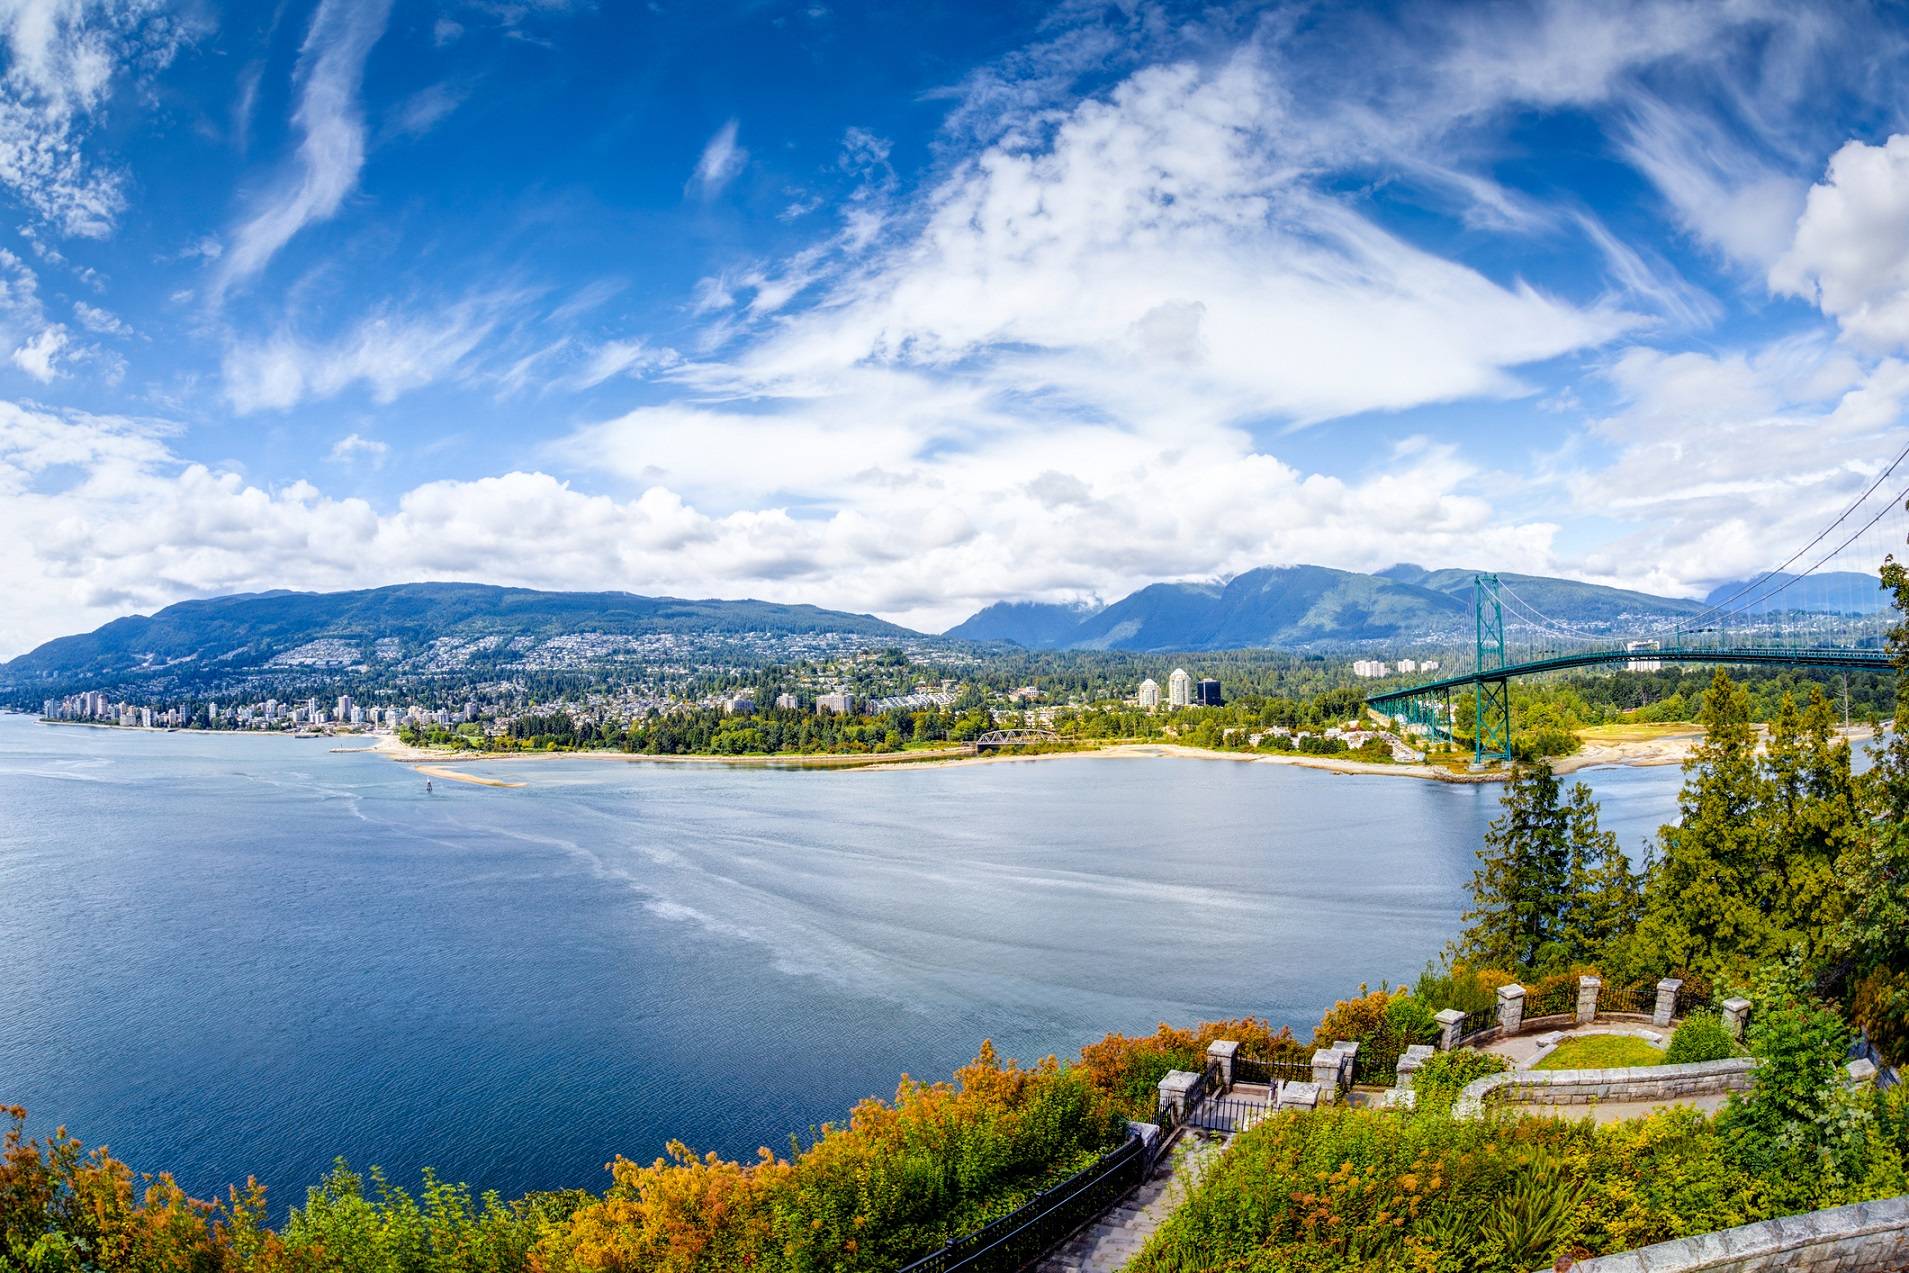 Vanouver Skyline at Prospect Point in Stanley Park, Canada